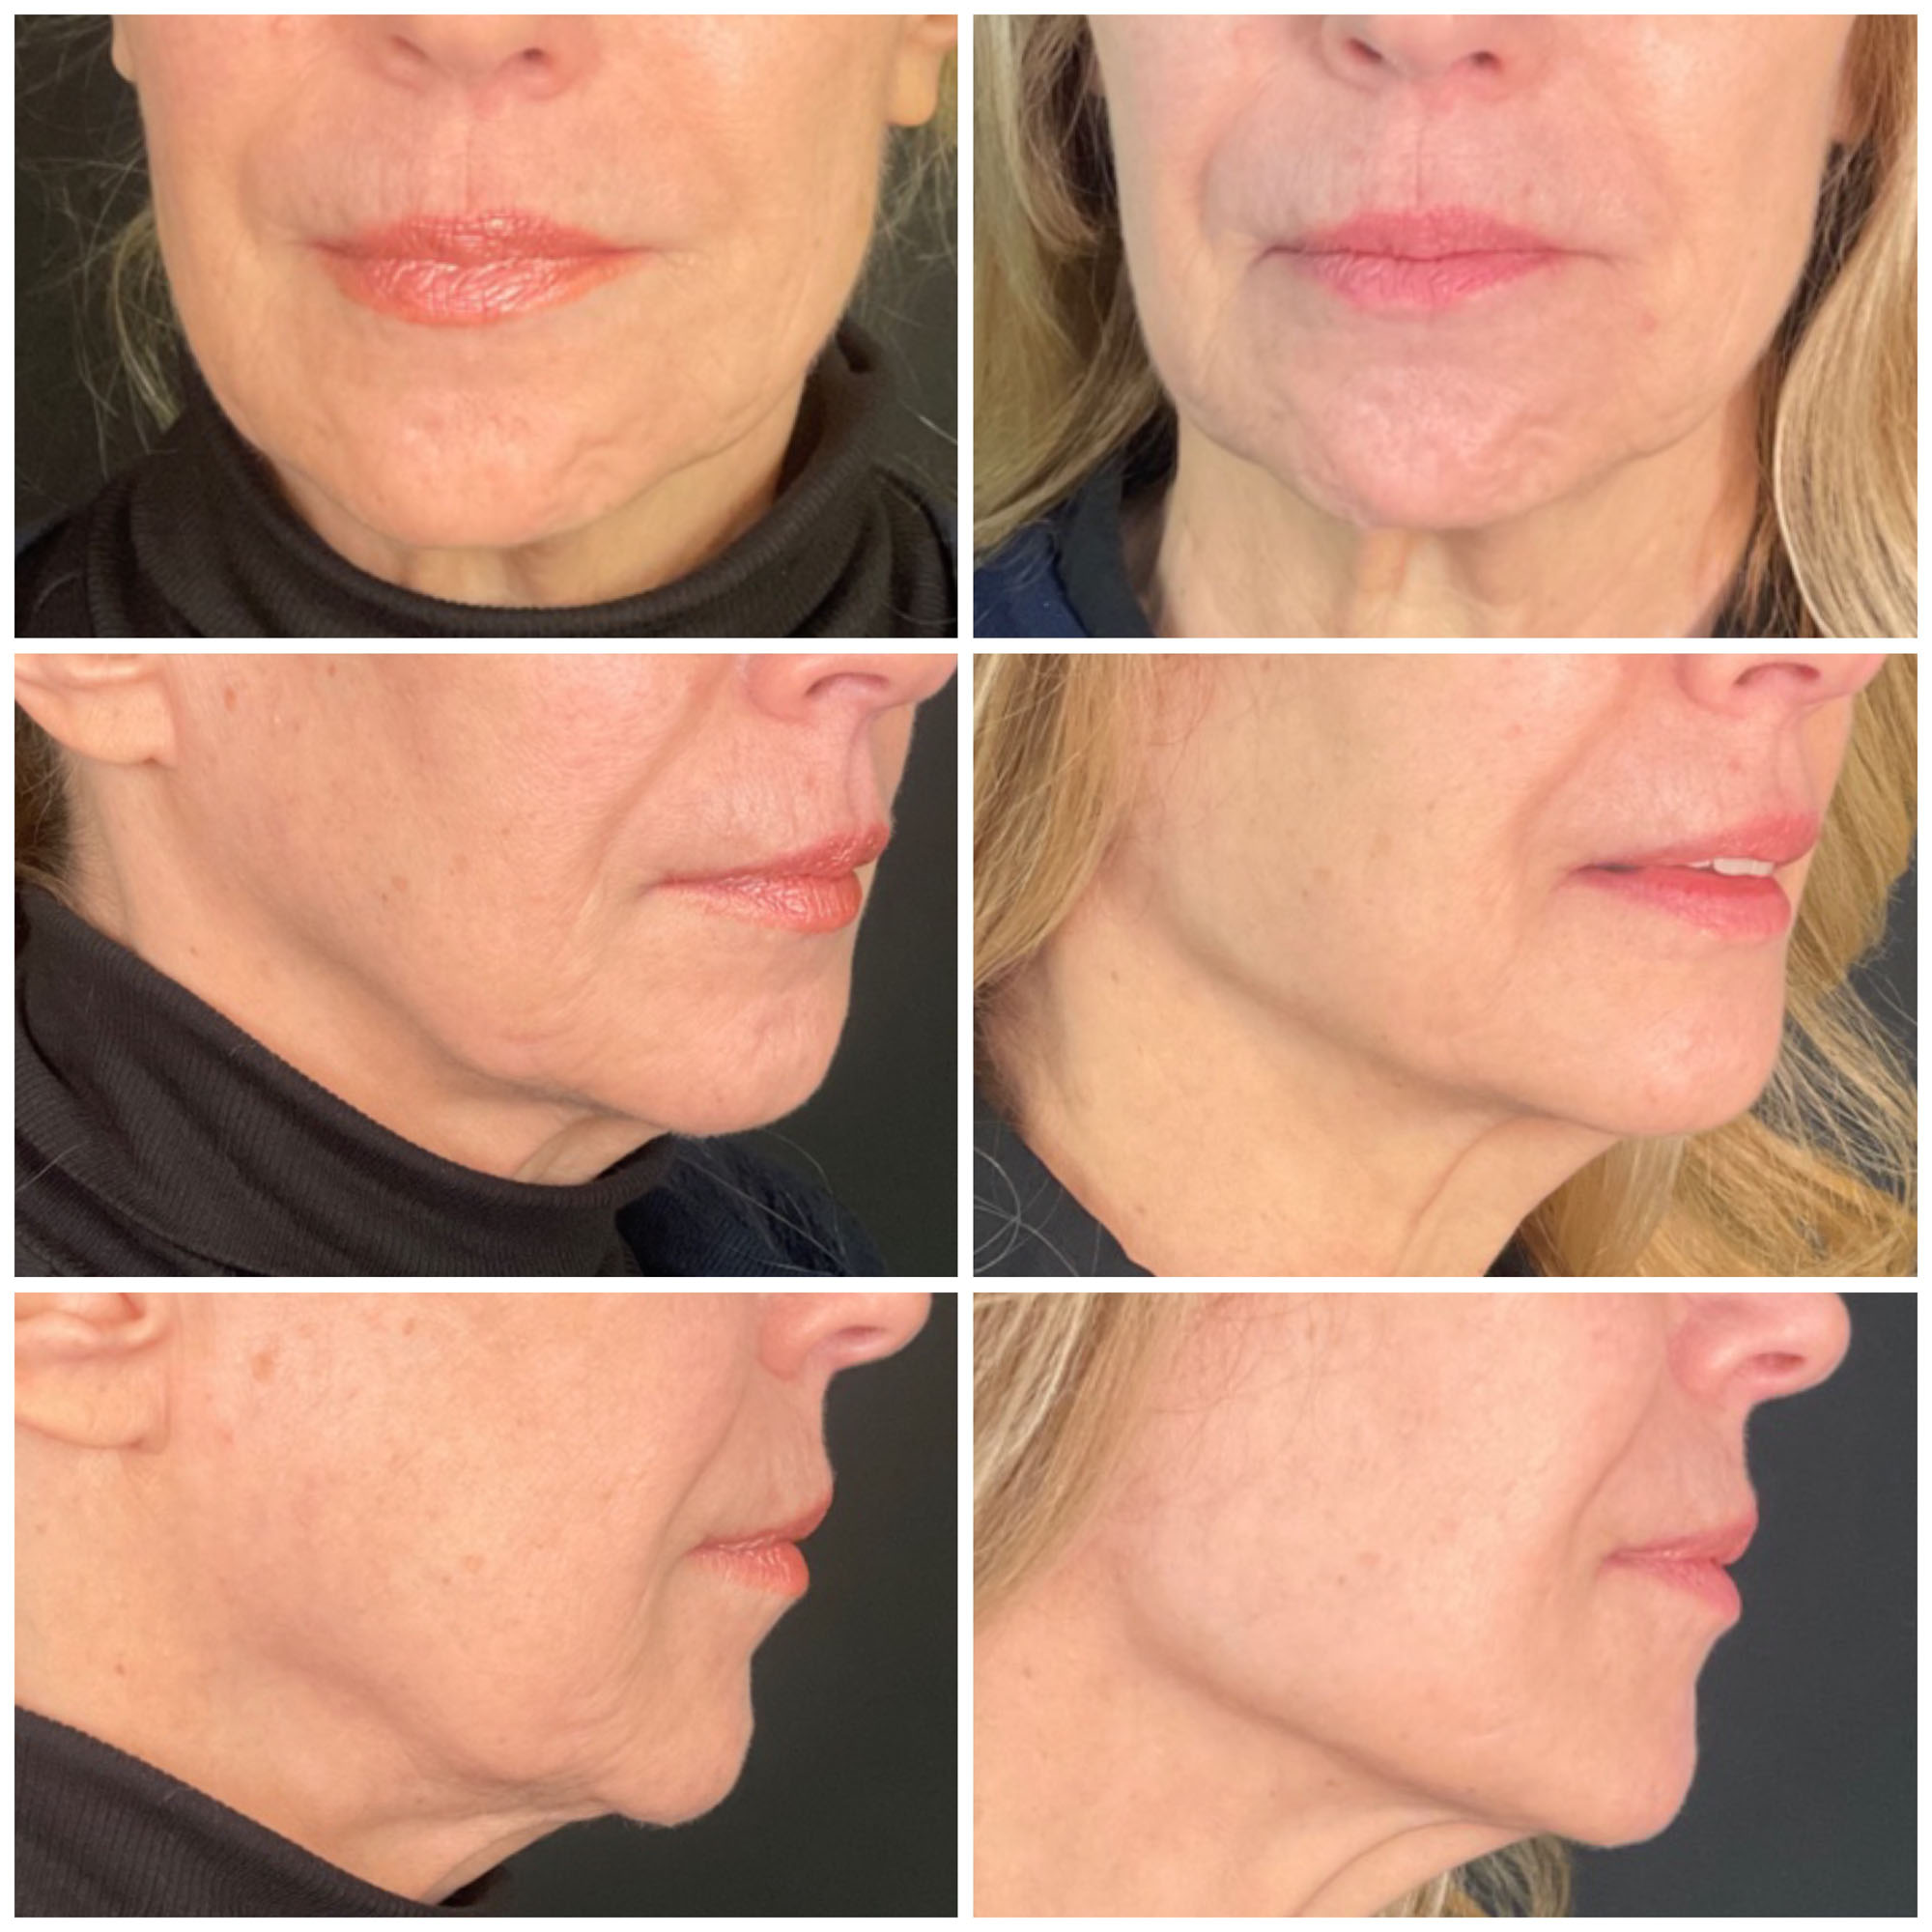 Jawline Contouring Filler Before and After images from Refresh Aesthetic Center in Whitefish Bay WI